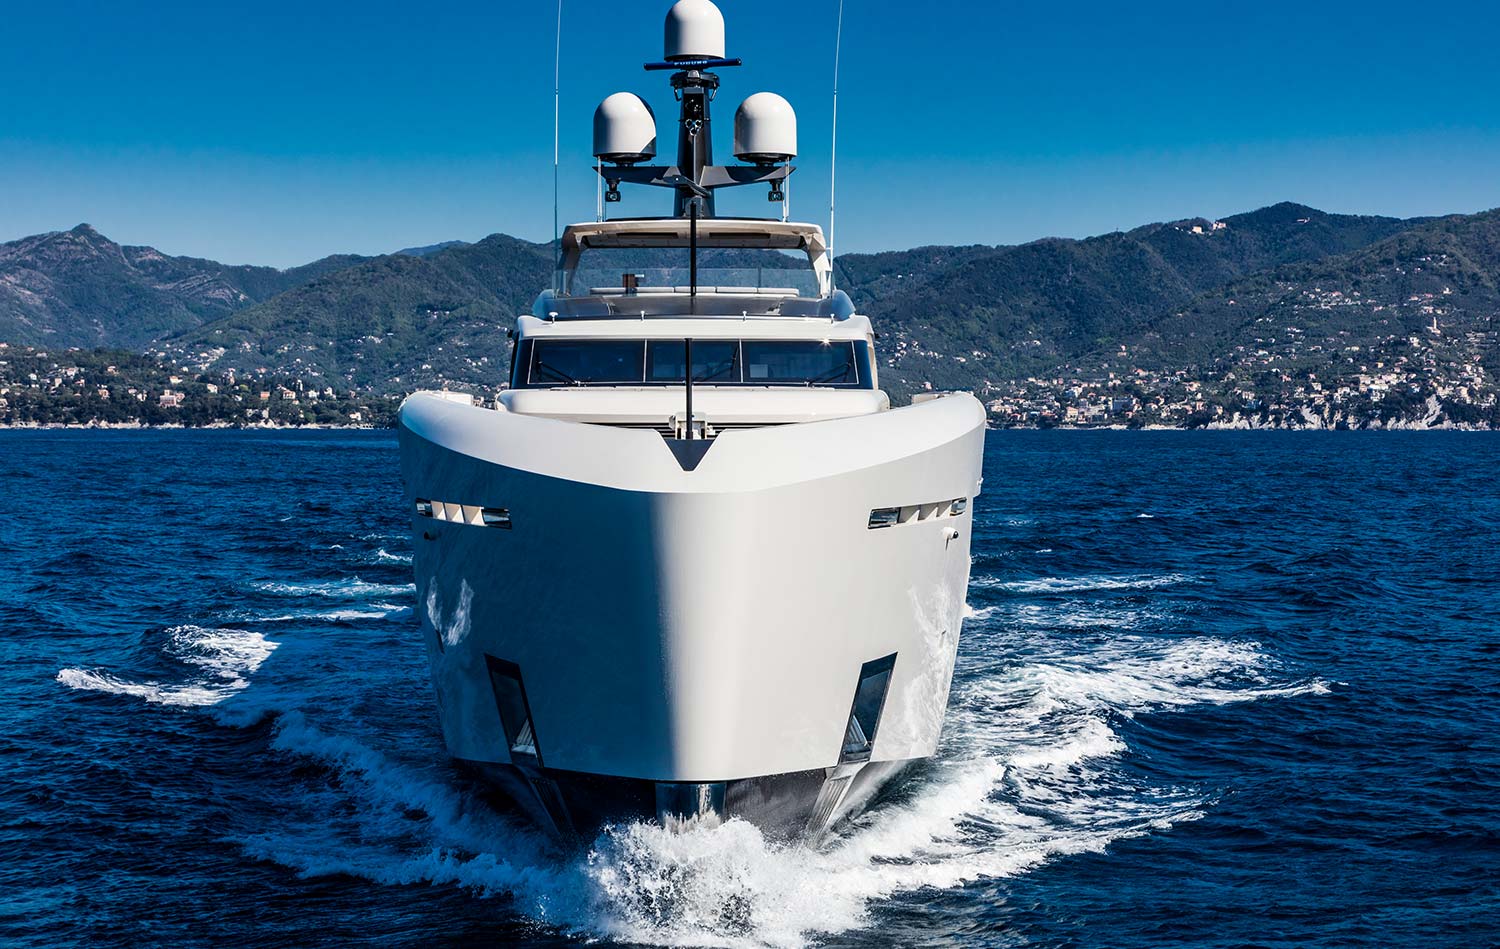 Tankoa Yachts-Tankoa italian luxury super yachts available for sale and charter, all in our database.